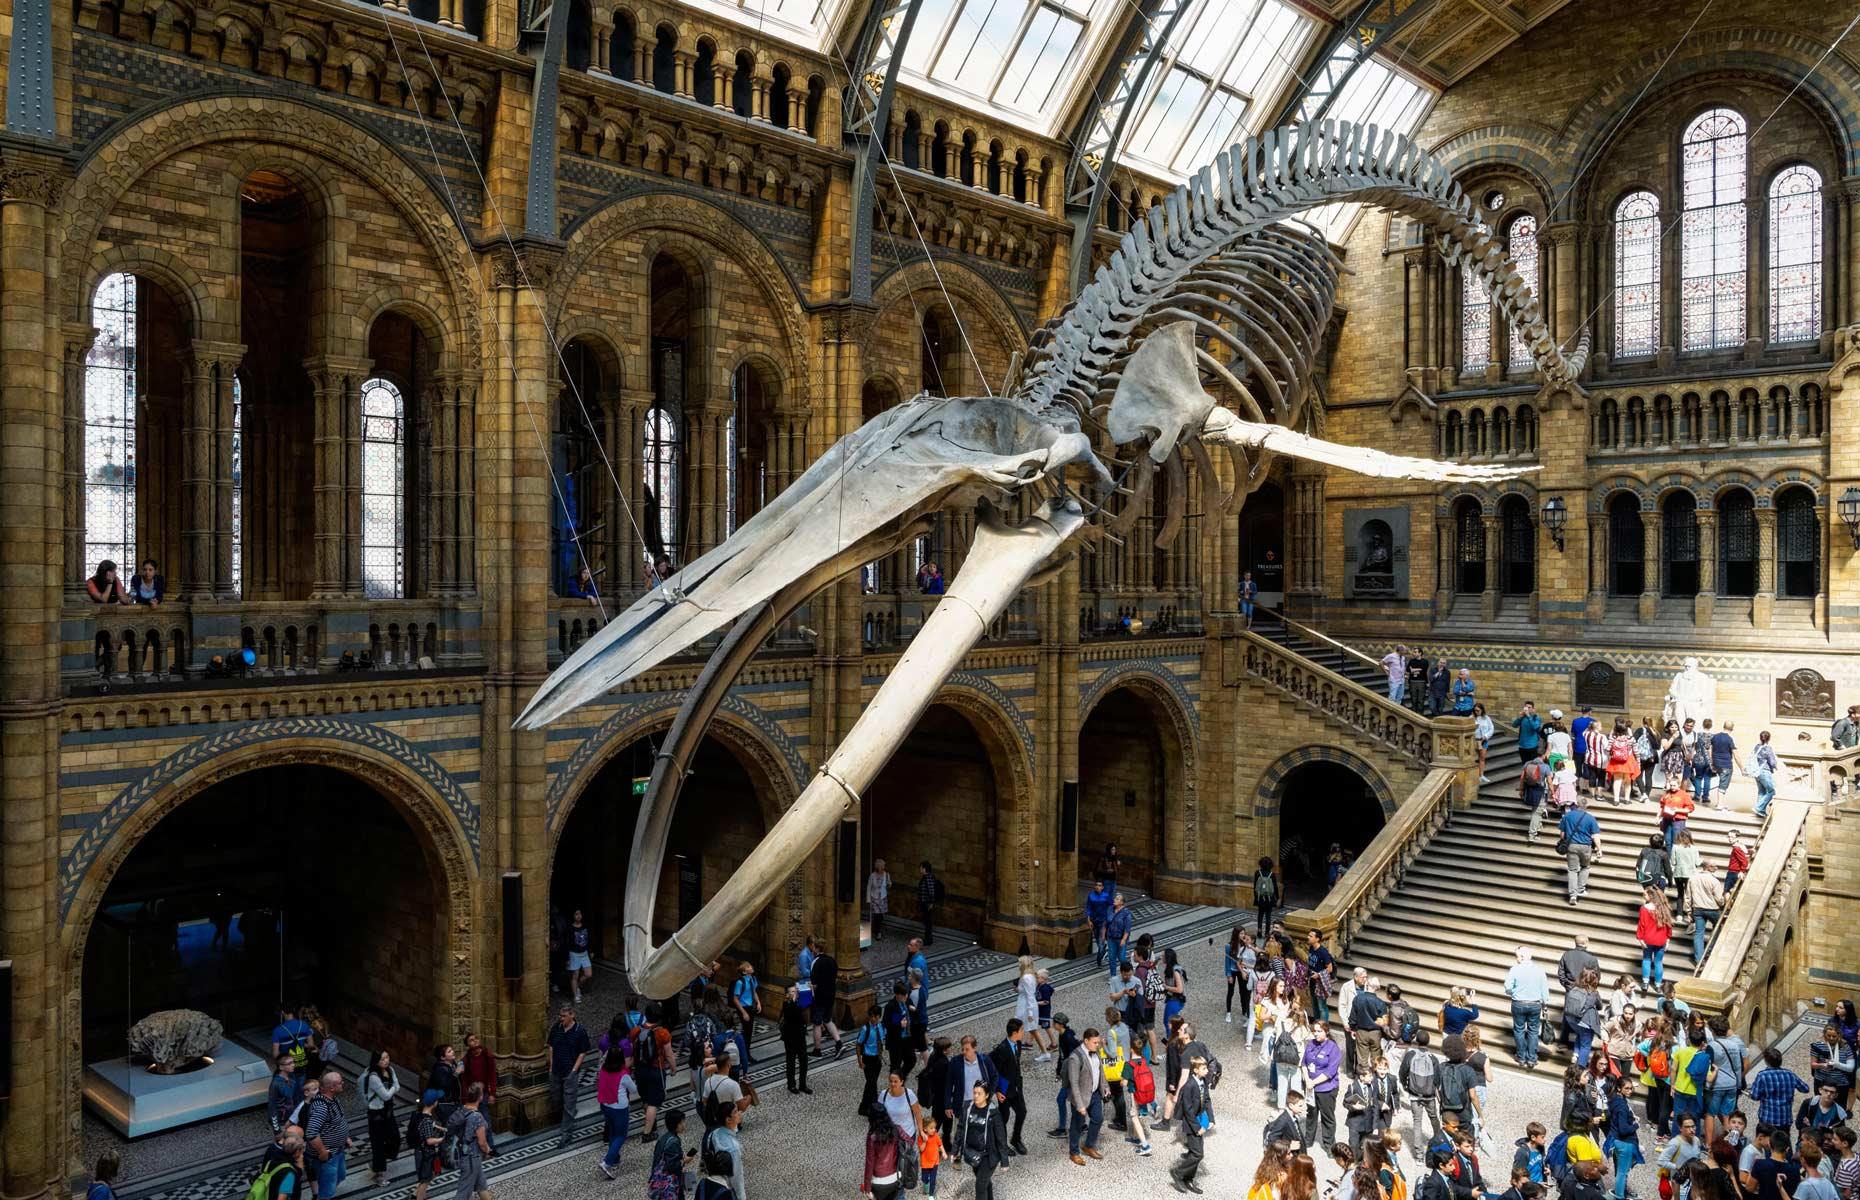 <p>A real-life <em>Night at the Museum</em> experience is likely to be on most kids' bucket lists (if not yours). As long as they're aged 7-11, they can join Dino Snores at the Natural History Museum in London, a roarsome sleepover with a couple of hundred other excitable kids. Expect dino-themed craft sessions, torchlit explorations, midnight feasts, giggling fits galore and not much sleeping at all.</p>